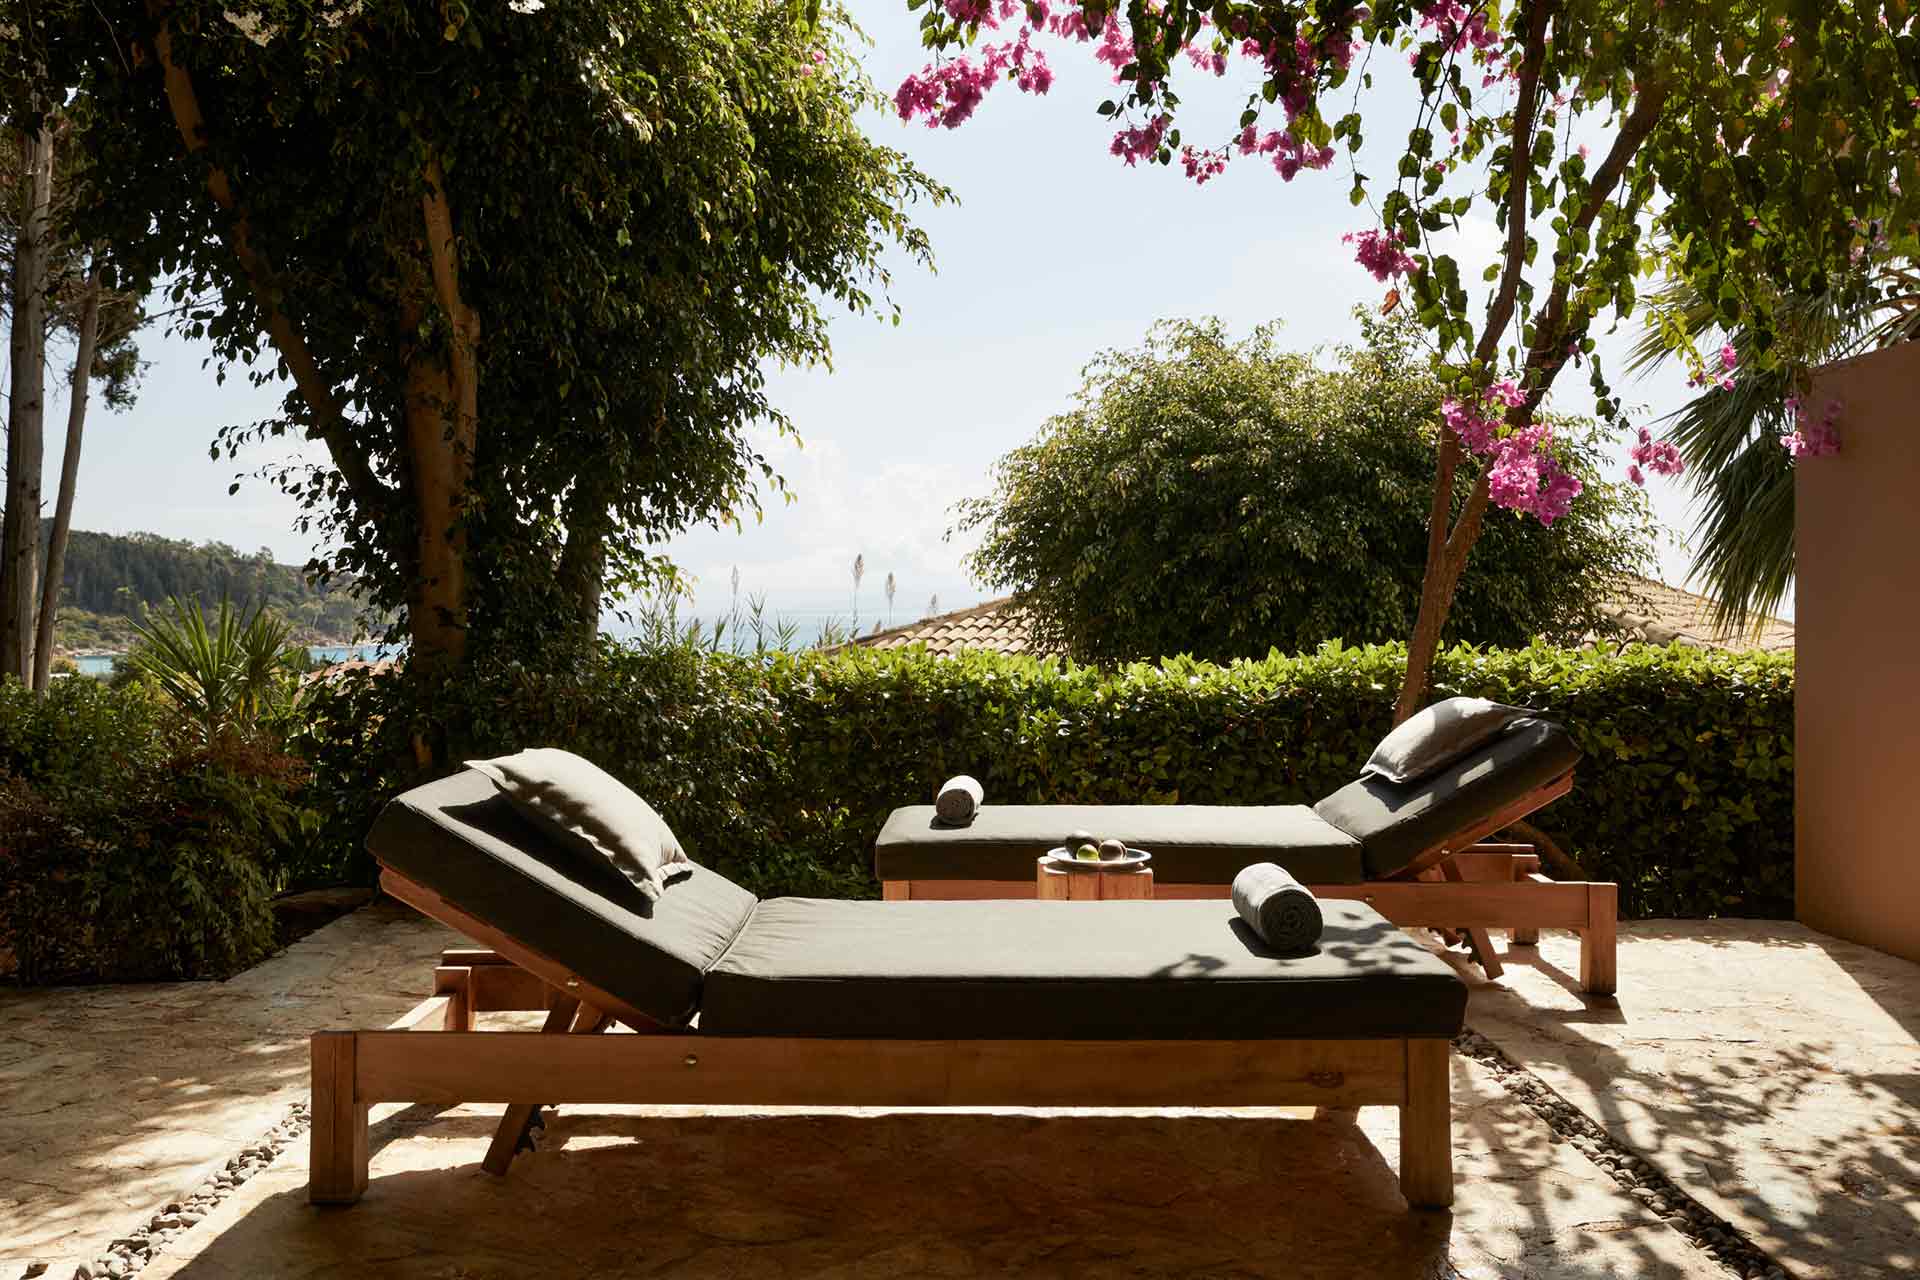 sunbeds at an outdoor patio in Kefalonia